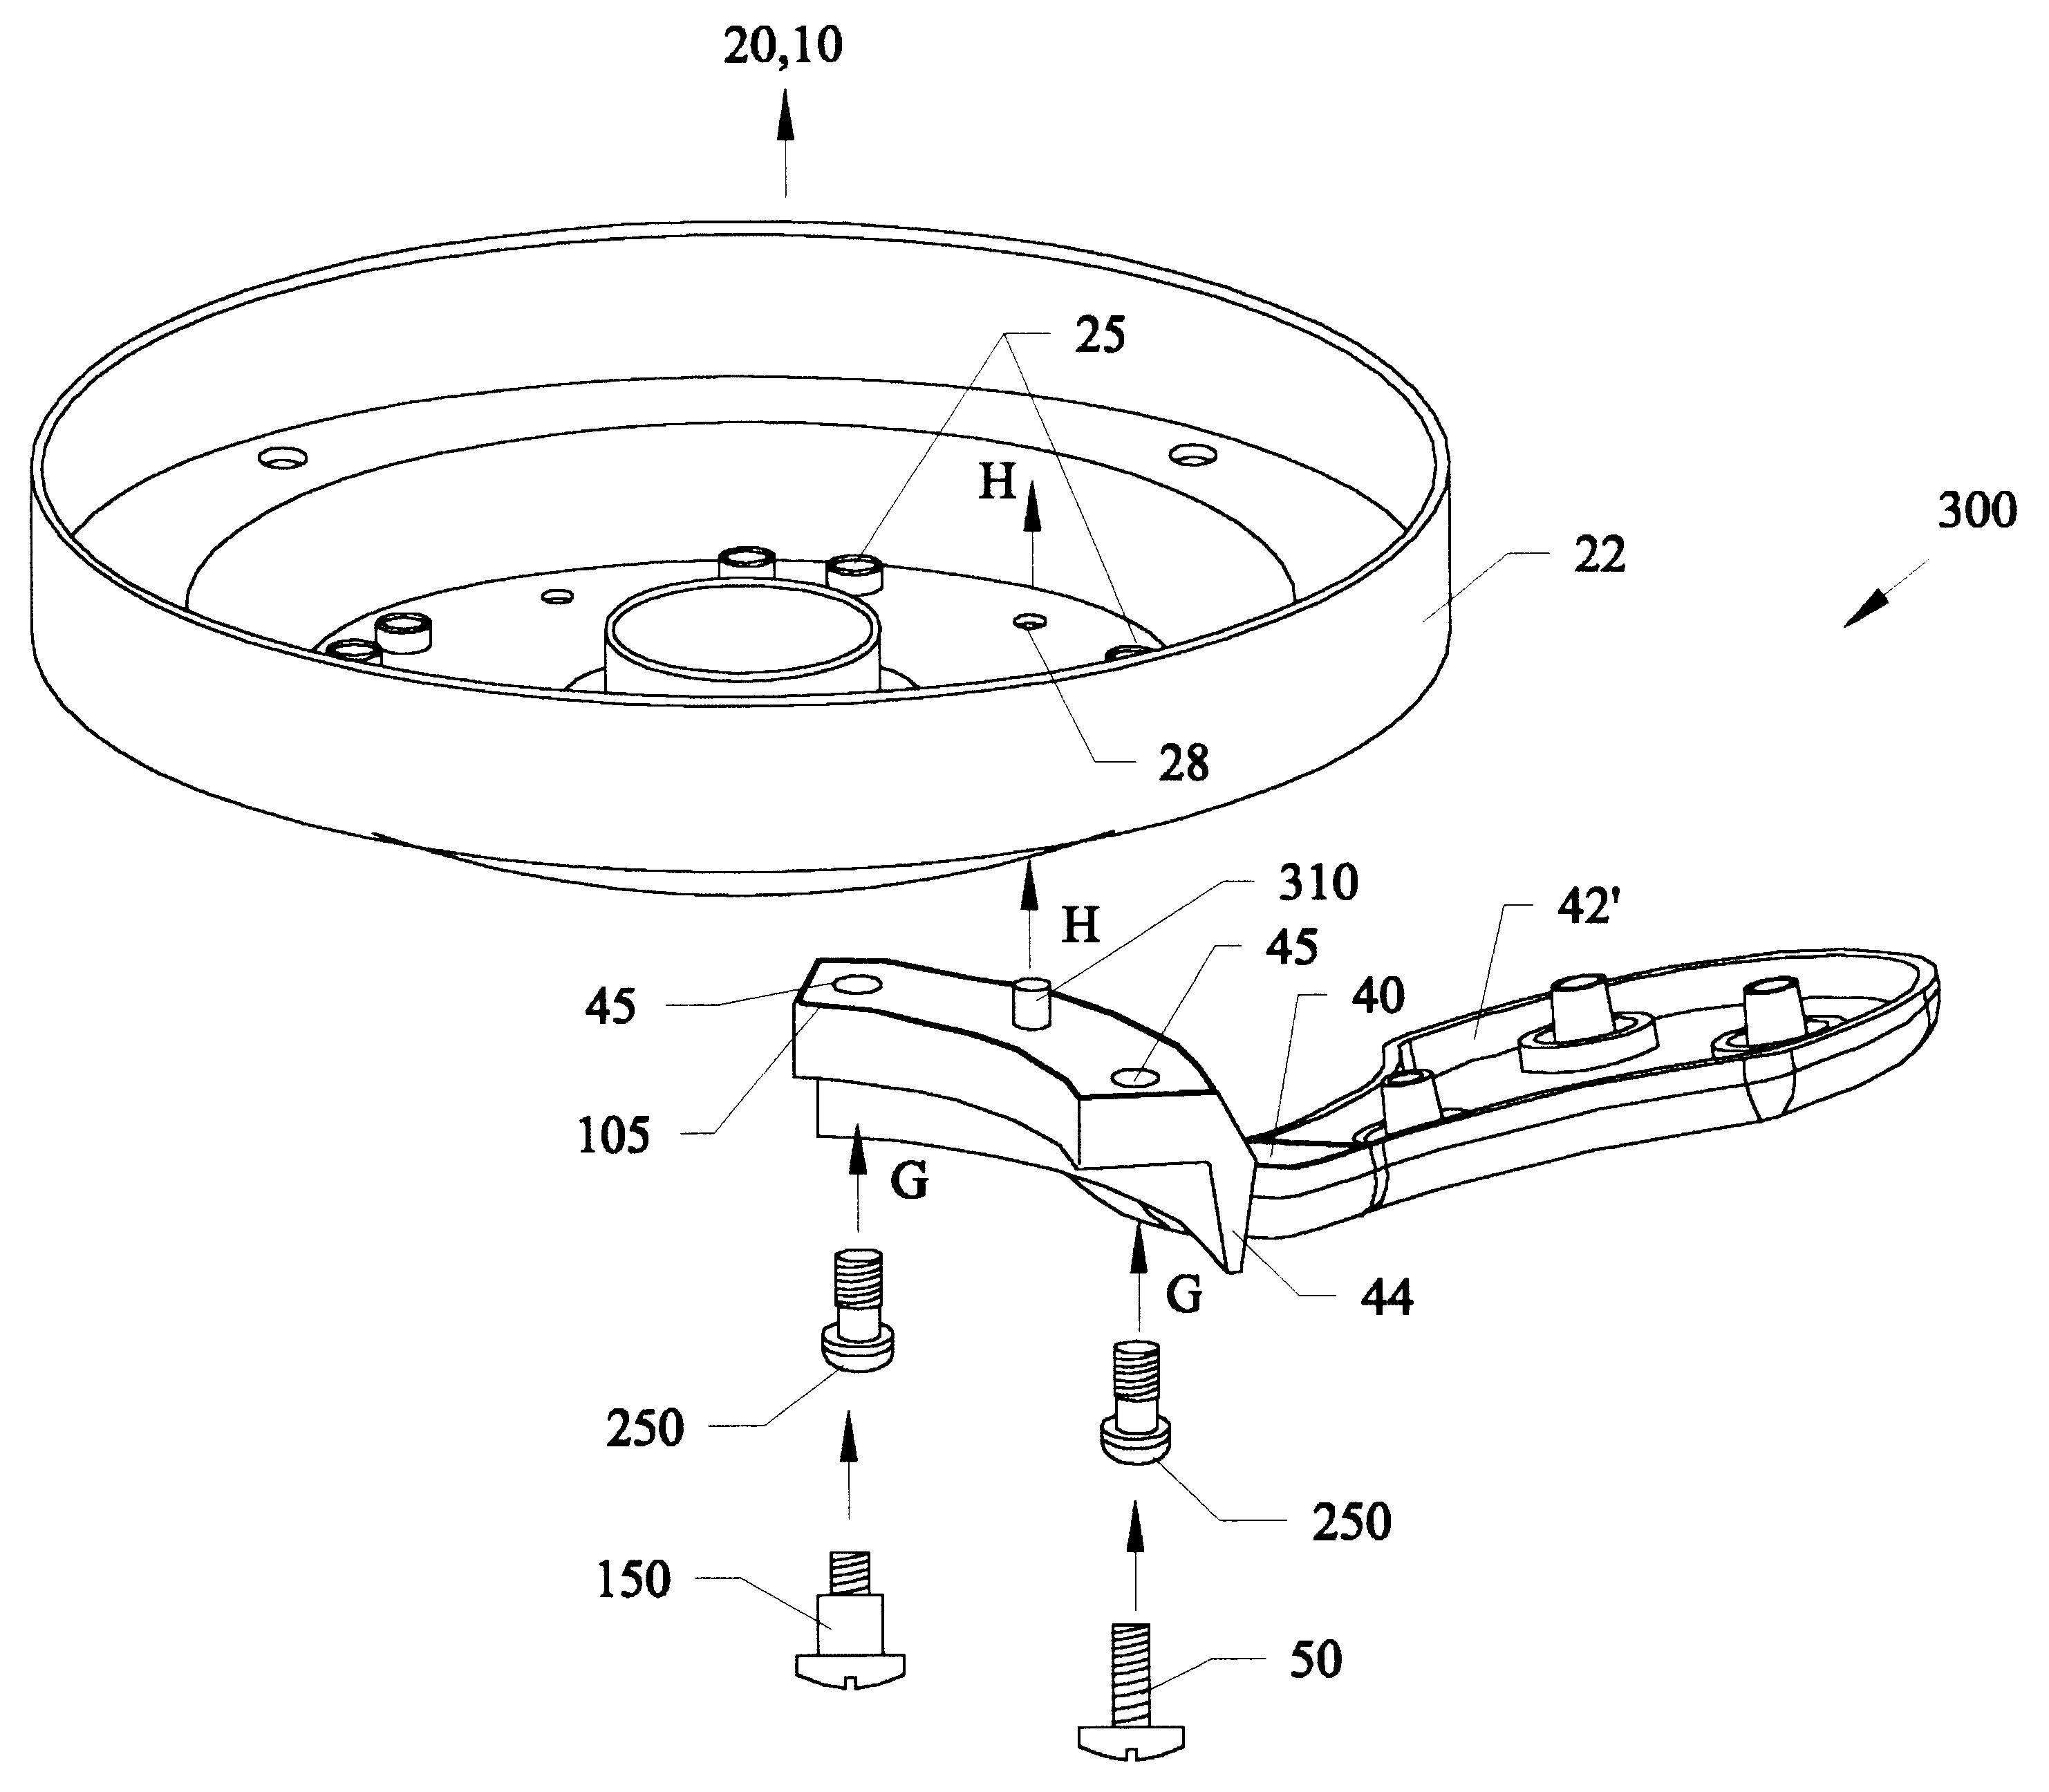 Device for connecting a fan blade to a rotor of a ceiling fan motor